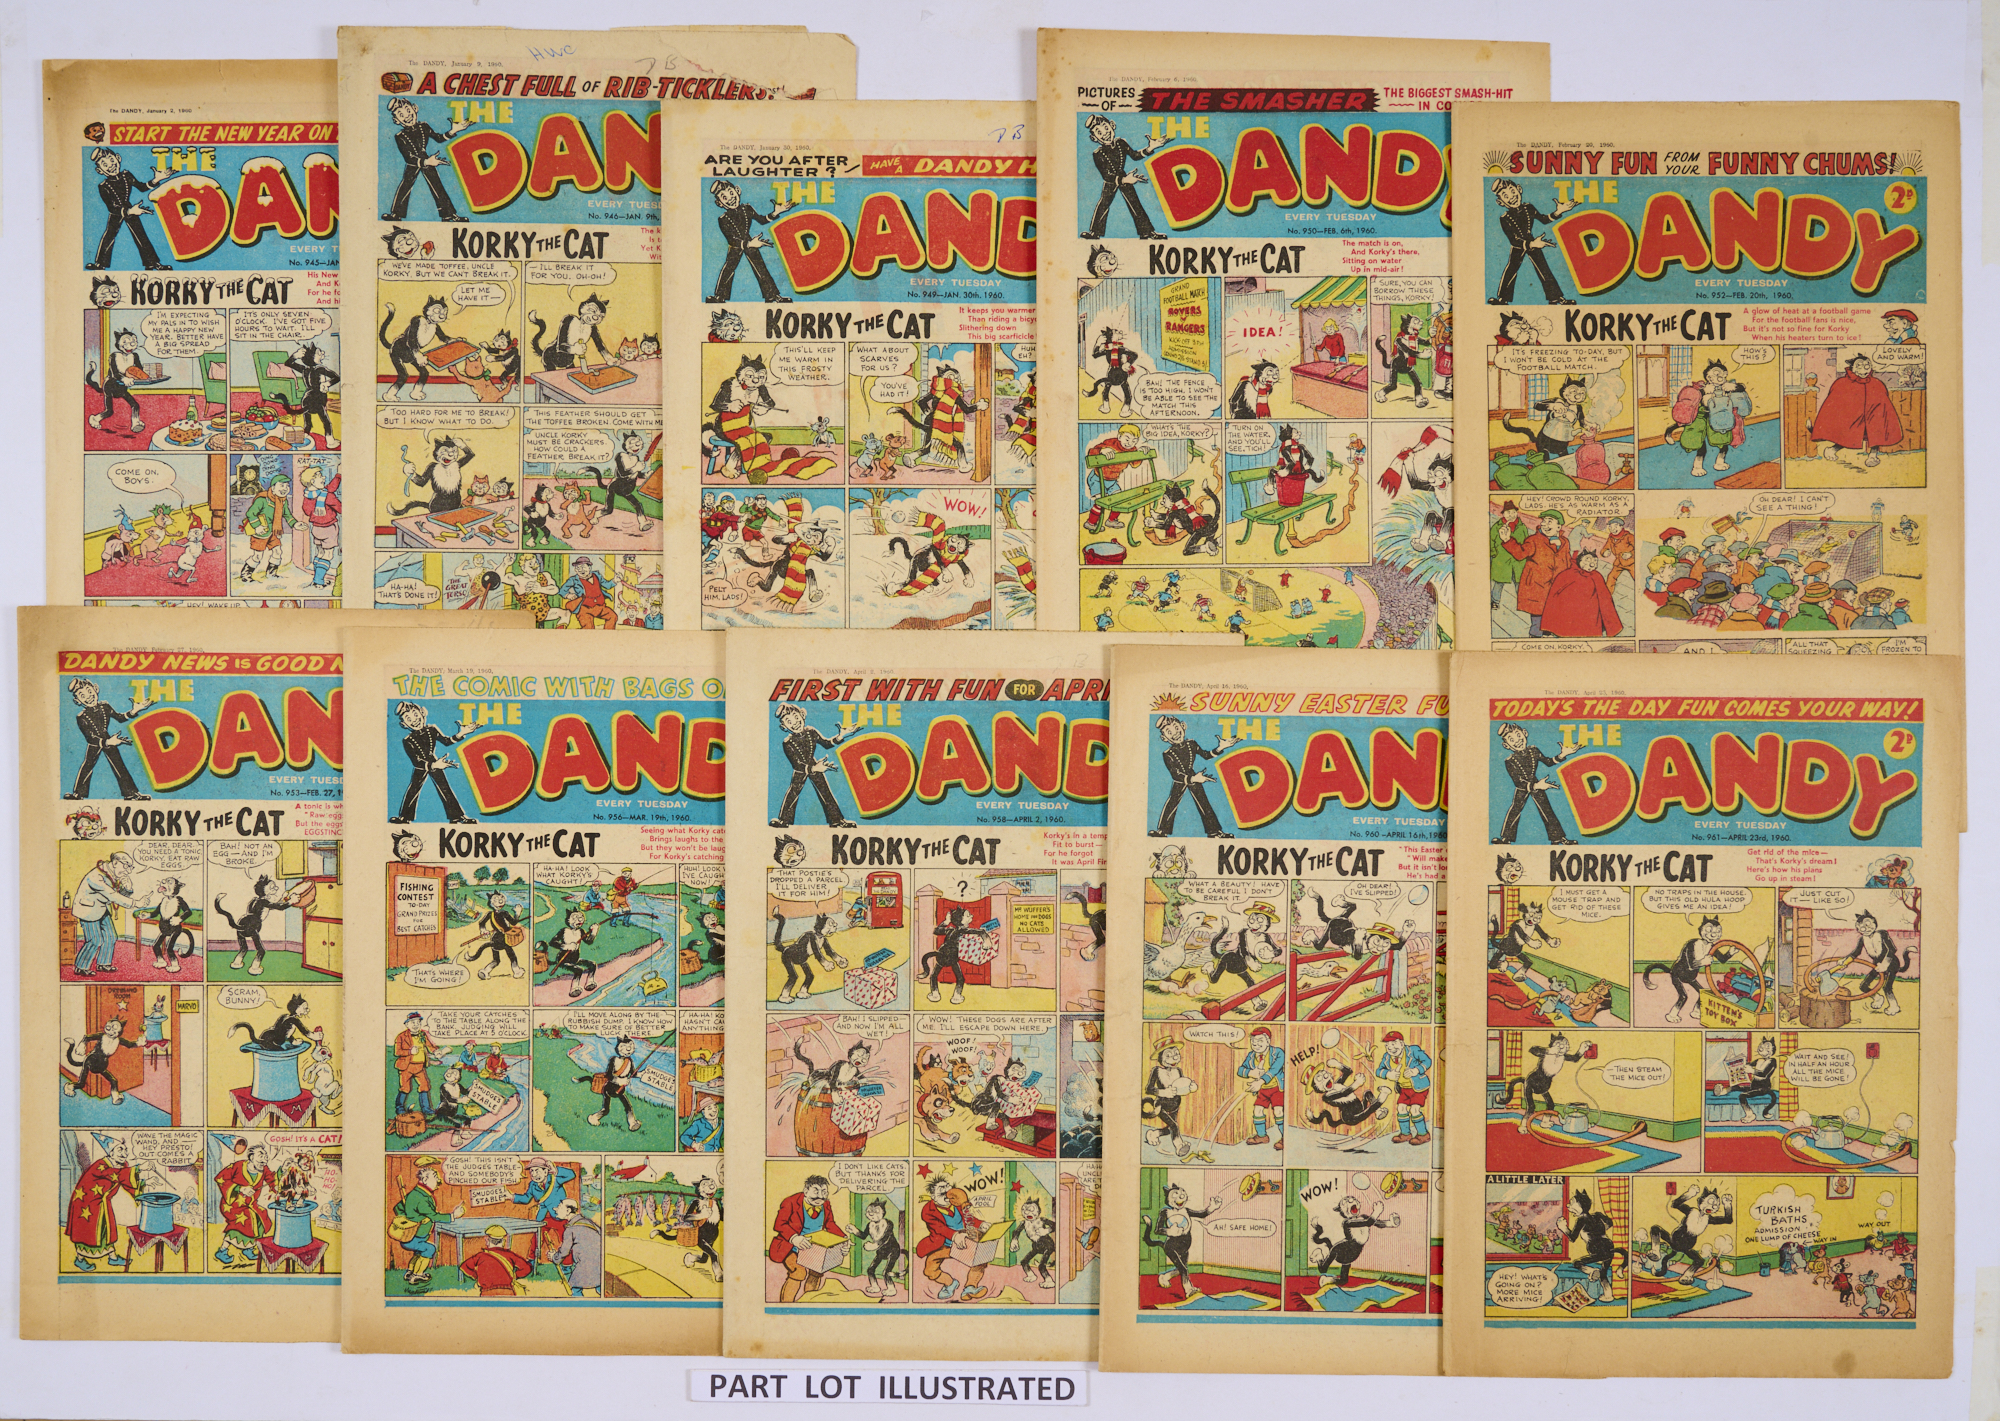 Dandy (1960) 945-953, 955, 956, 958, 960, 961 including New Year, Easter and April Fool issues. No